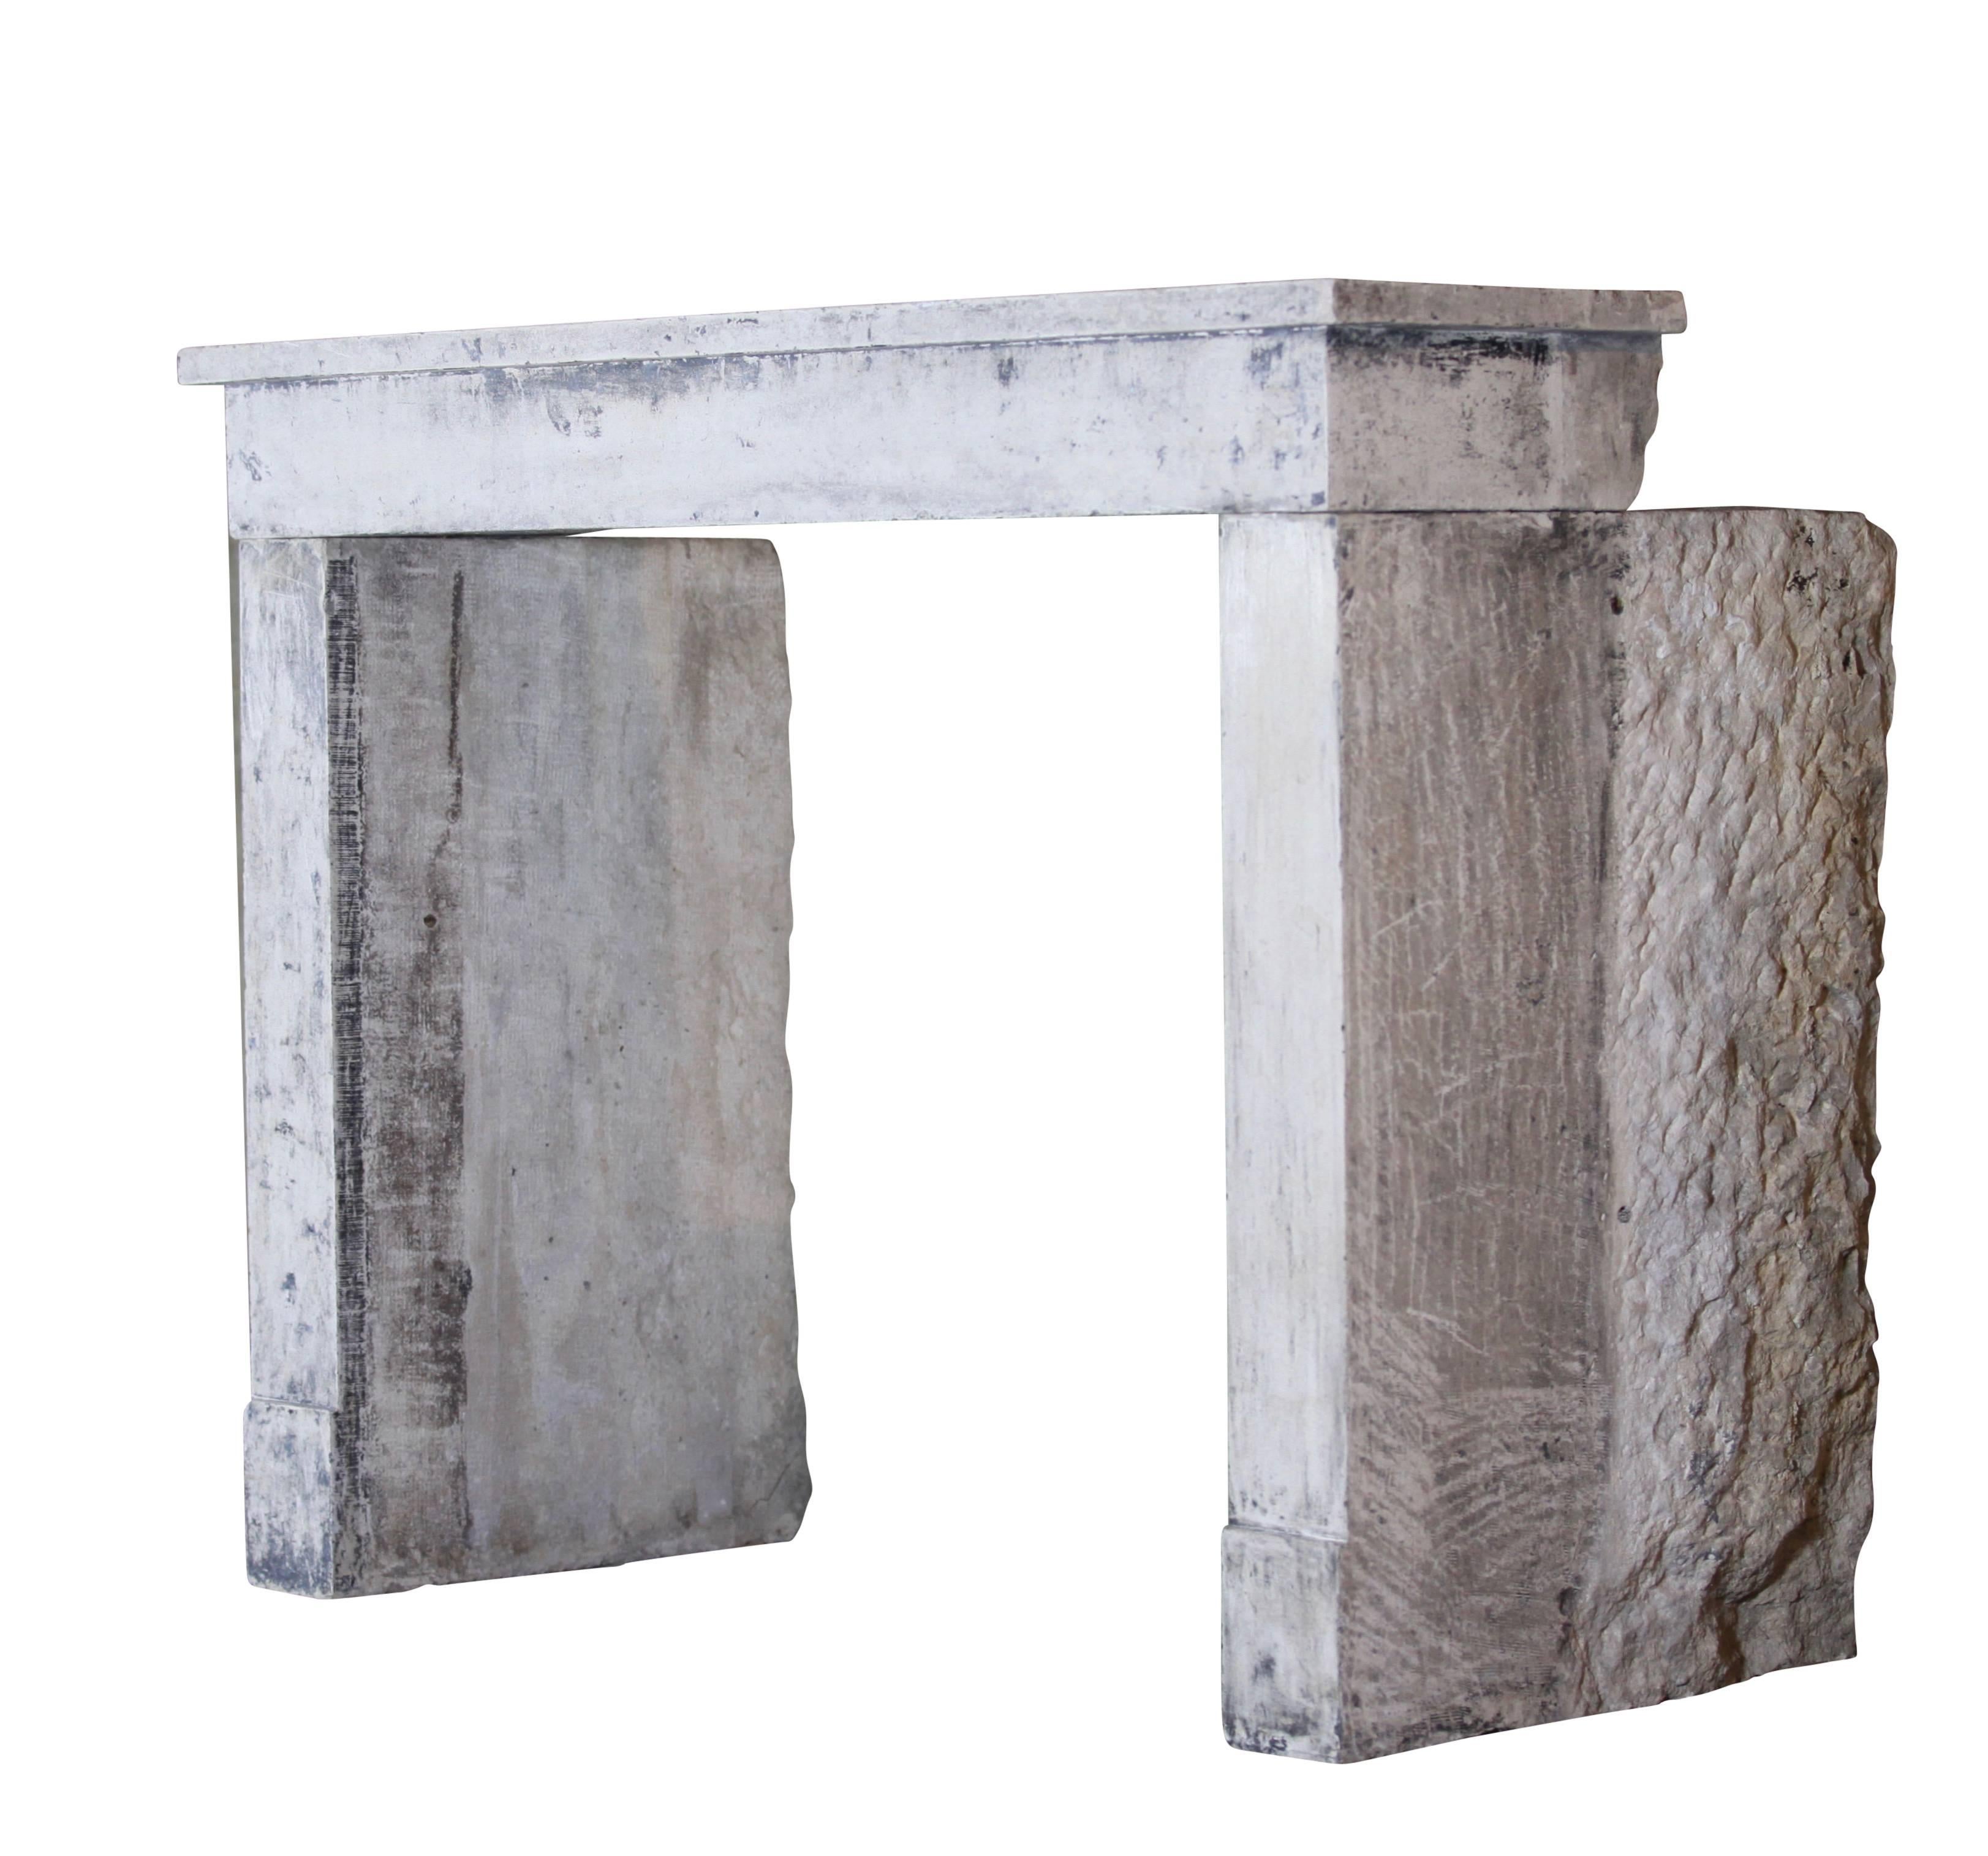 This small vintage fireplace surround in limestone has remains of the original patina. It is perfect for a country side house, a rustic room.
Measures: 
131 cm EW 51.57